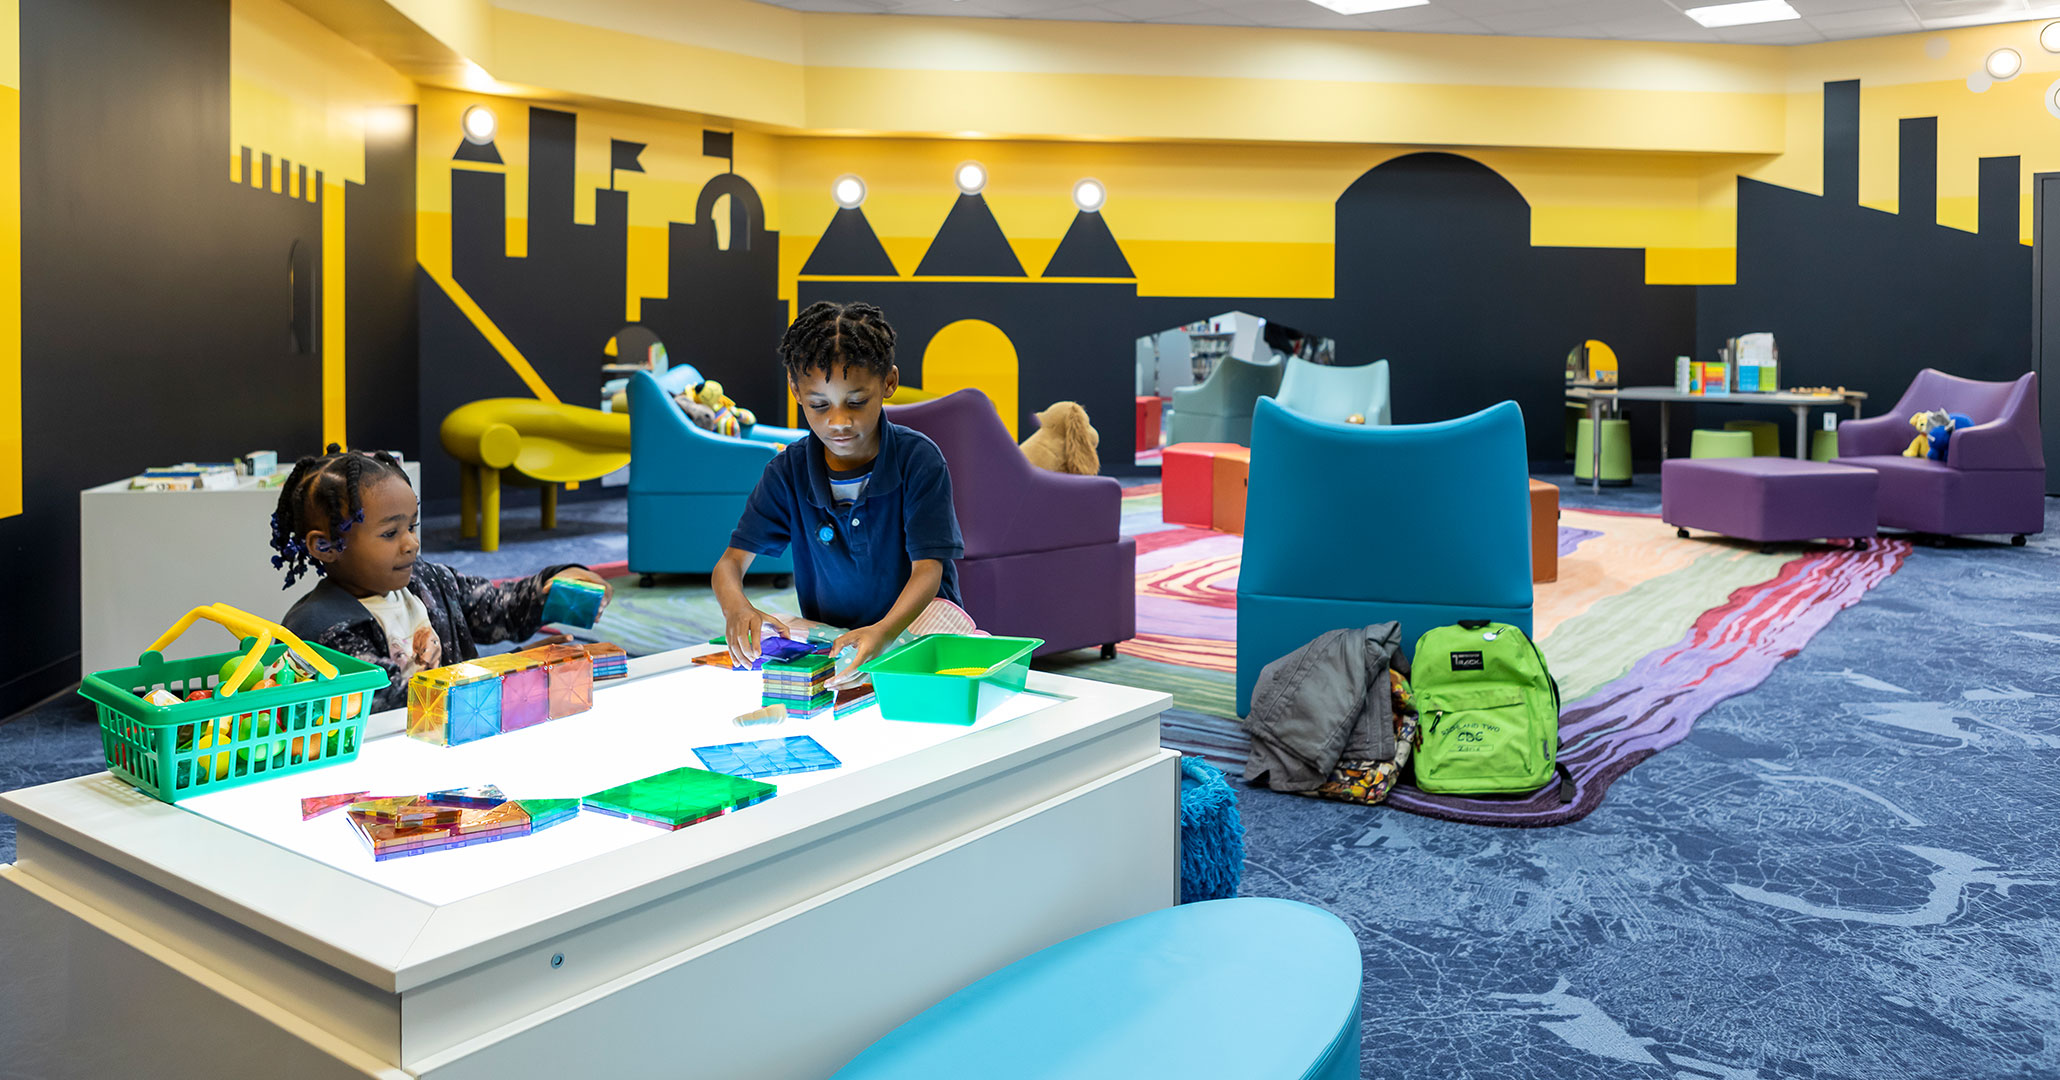 Boudreaux architects worked with the Richland Library to update the exterior and design the interiors at the Richland Library Northeast Branch Location. The Children’s room is full of stimulating and educational equipment.